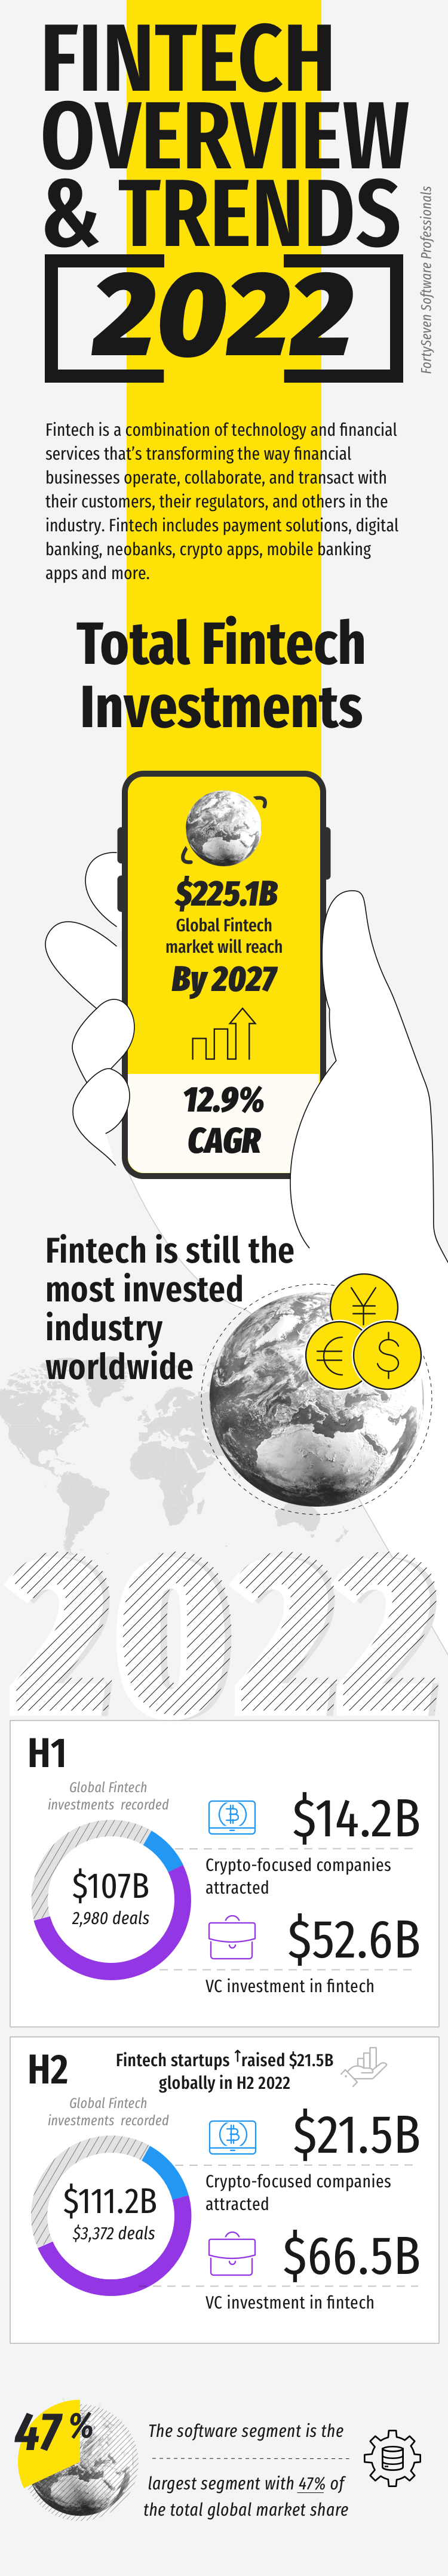 Infographic: Fintech Overview & Trends 2022 - 2023 - 17